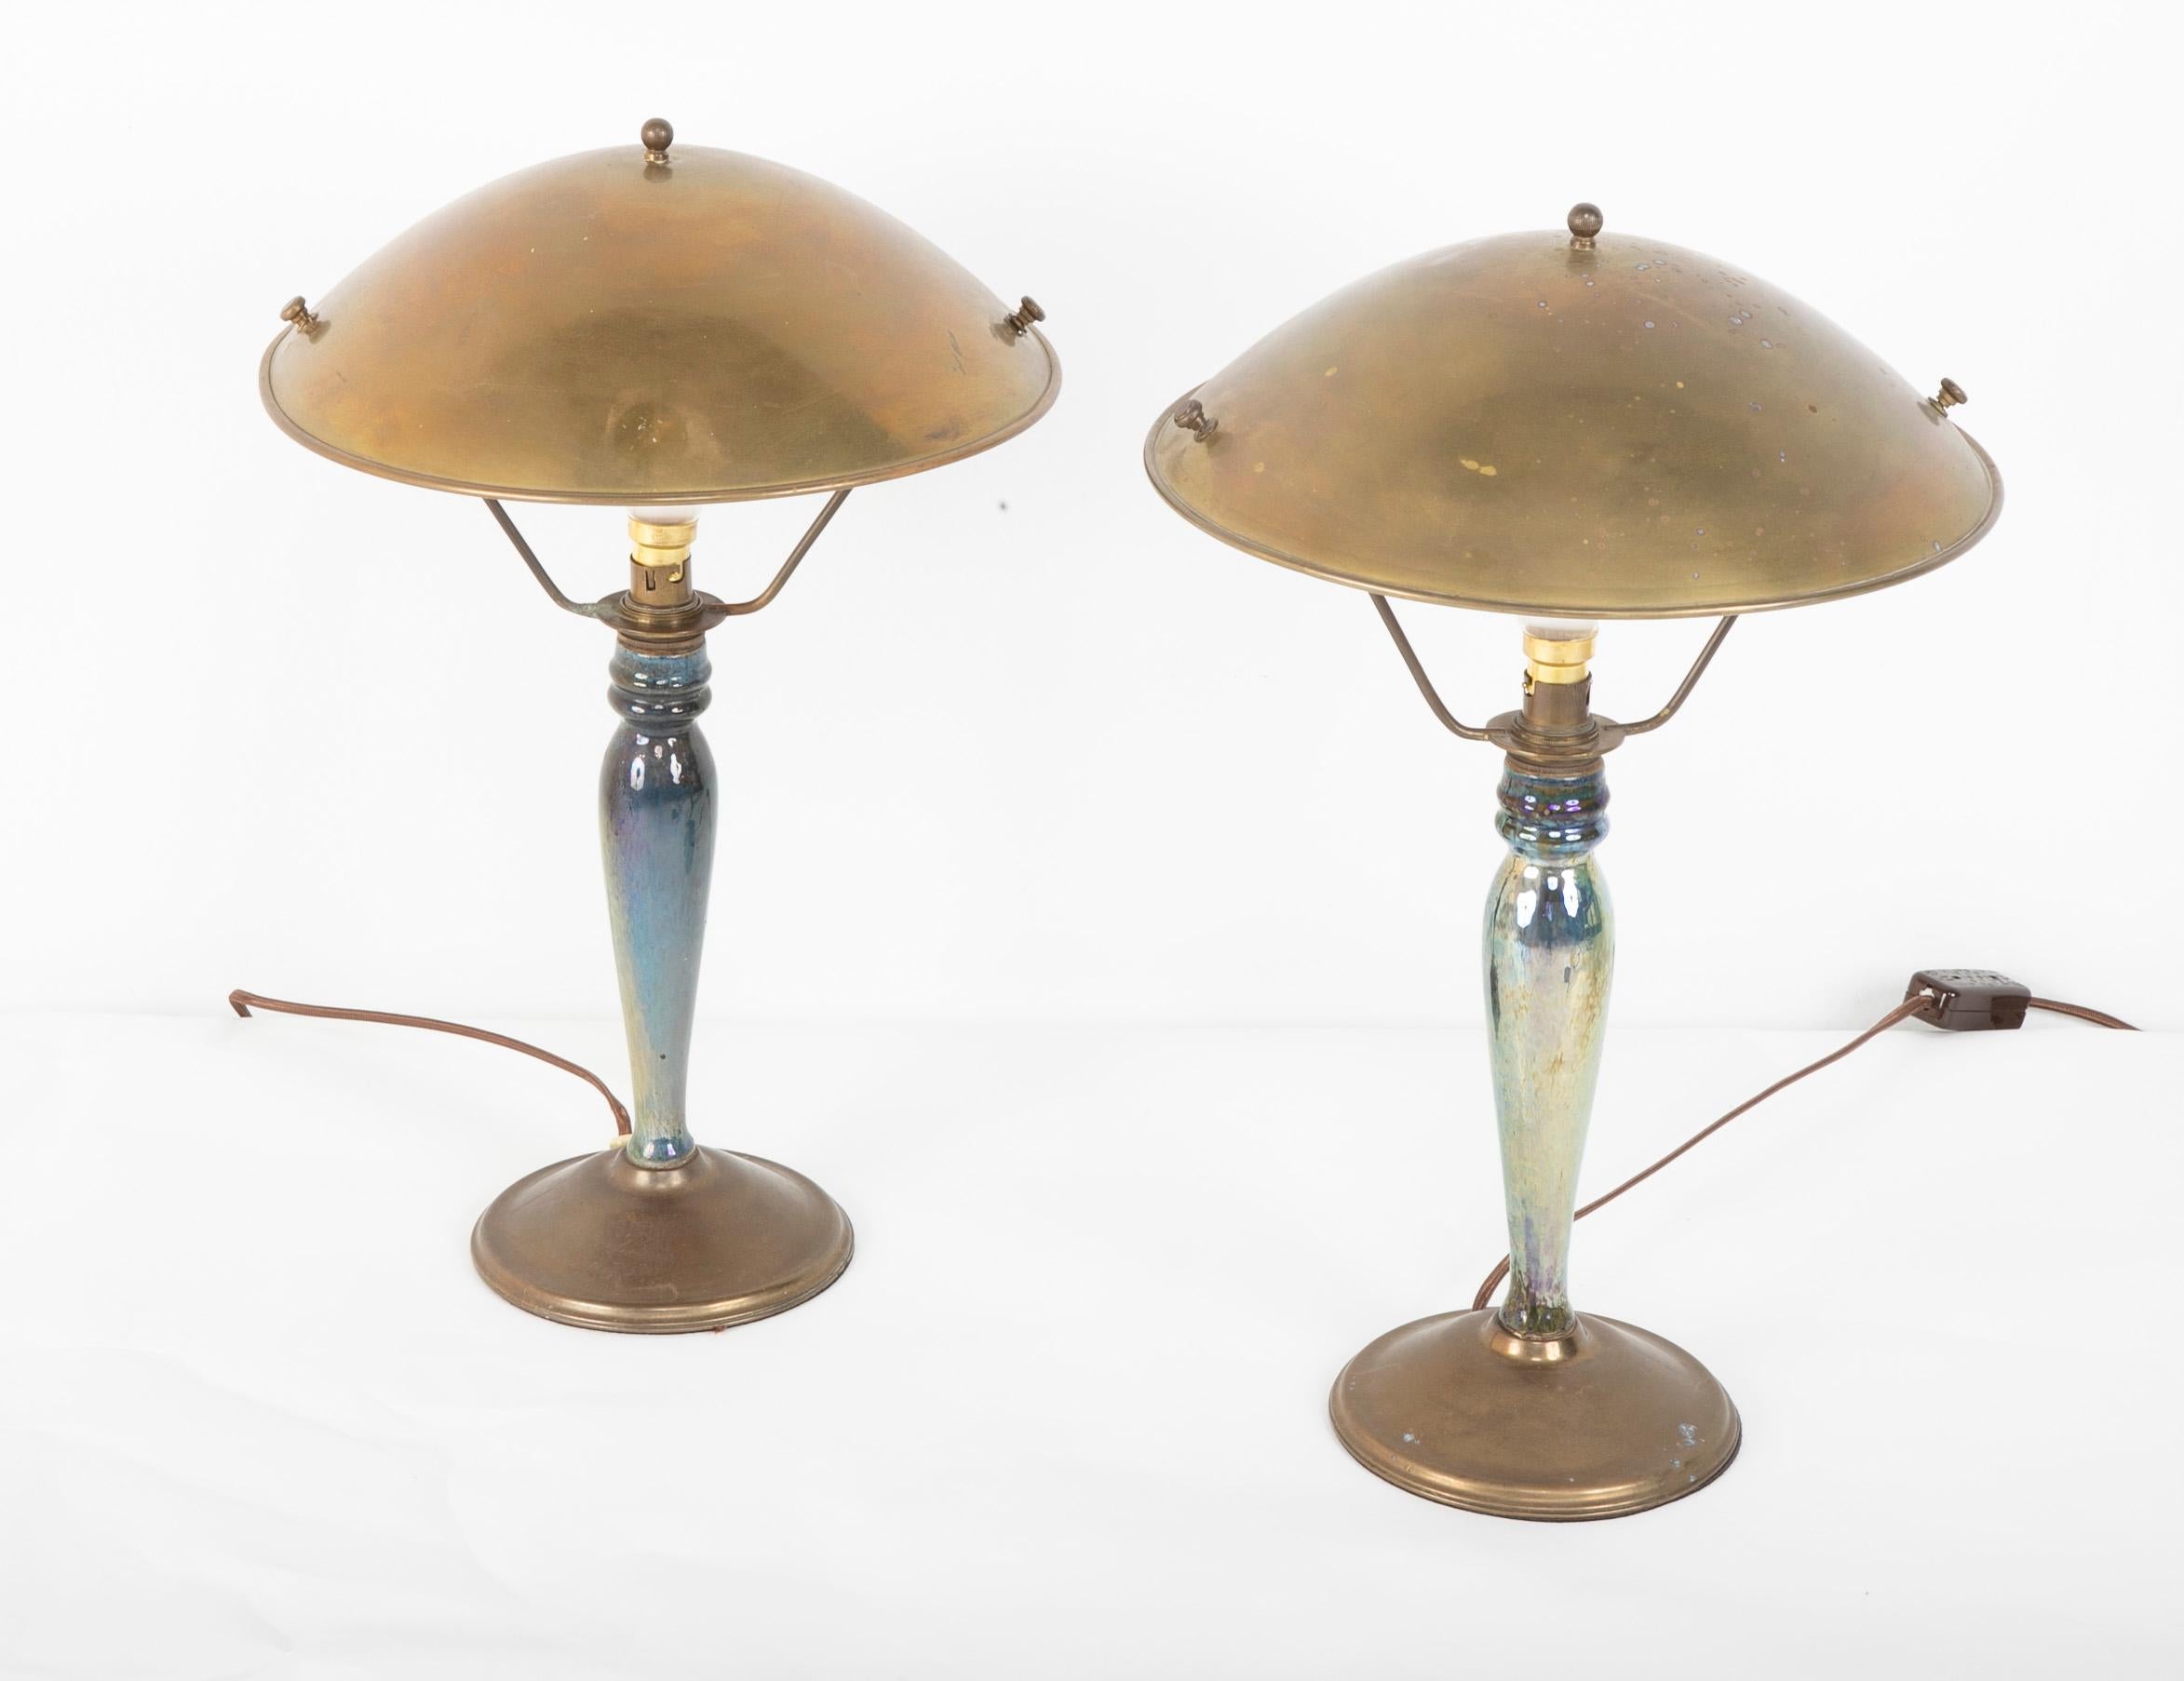 Art Nouveau Pair of Mid-20th Century French Blue Glazed Earthenware Lamps with Metal Shades